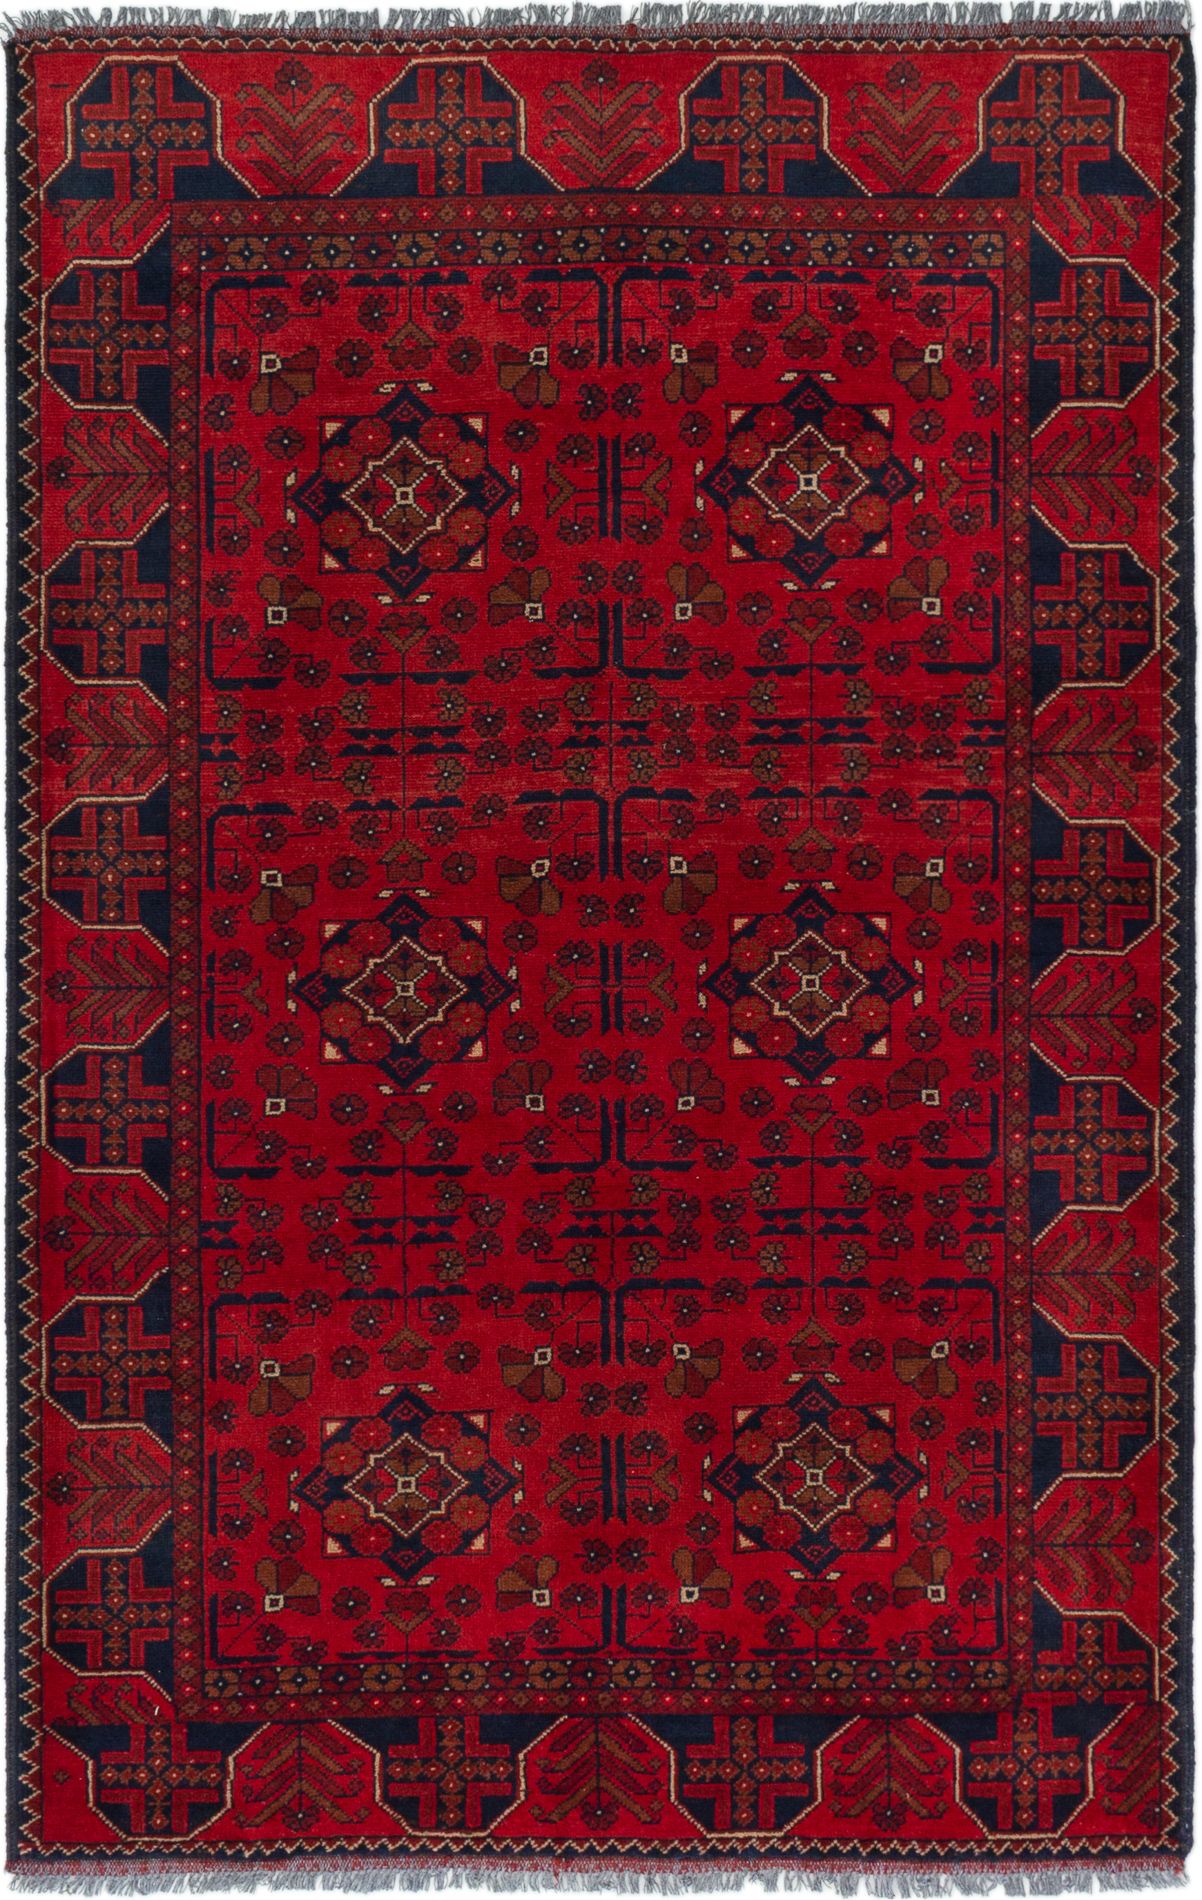 Hand-knotted Finest Khal Mohammadi Red Wool Rug 4'2" x 6'5" (21) Size: 4'2" x 6'5"  